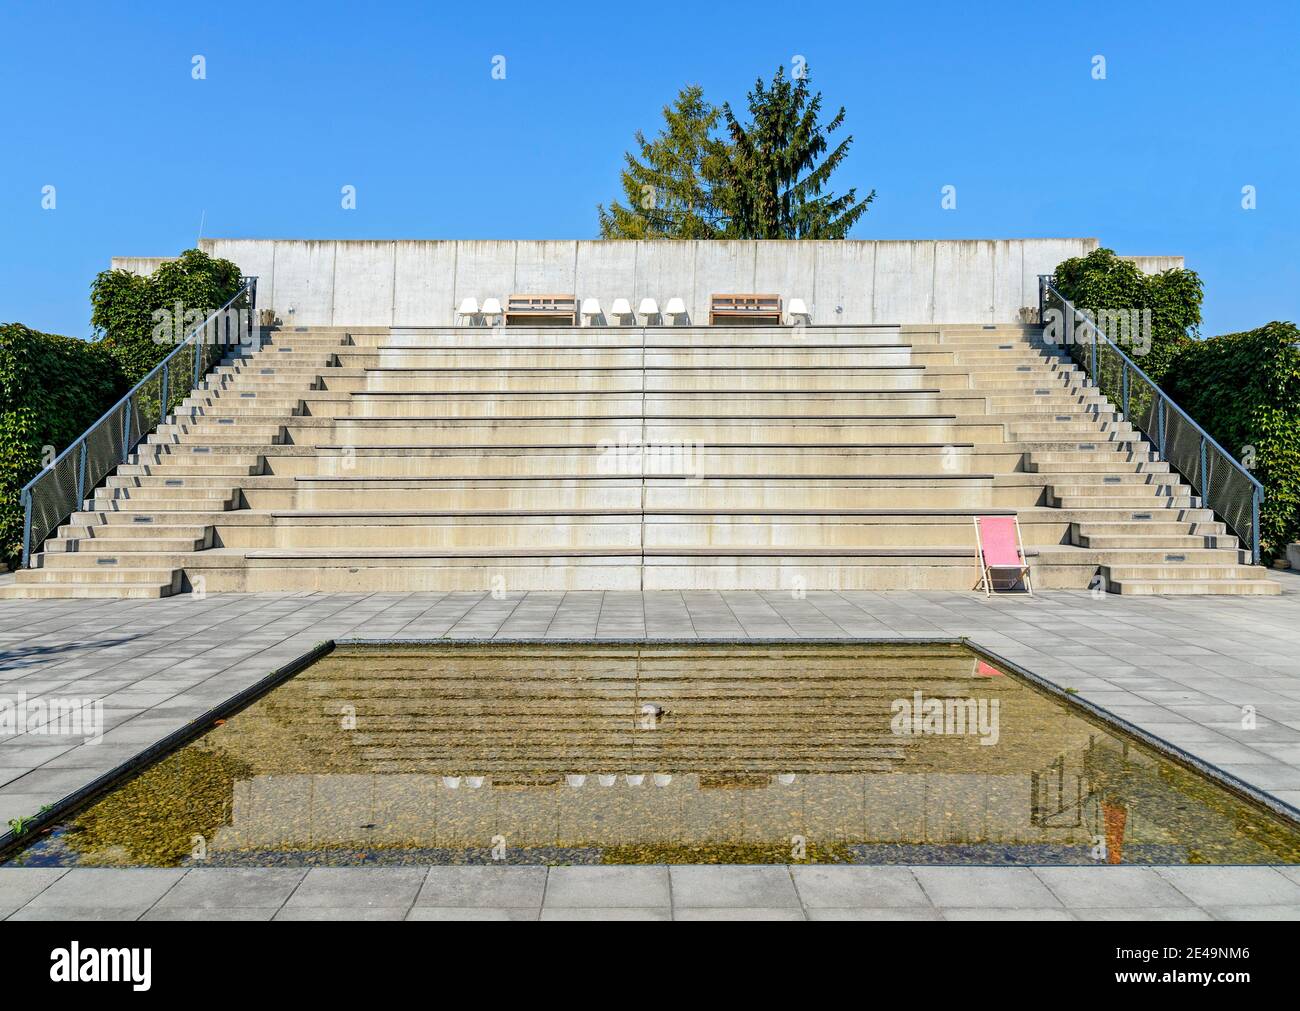 water basin and steep spectator stand made from concrete in the open with blue sky at Mistelbach, Austria Stock Photo